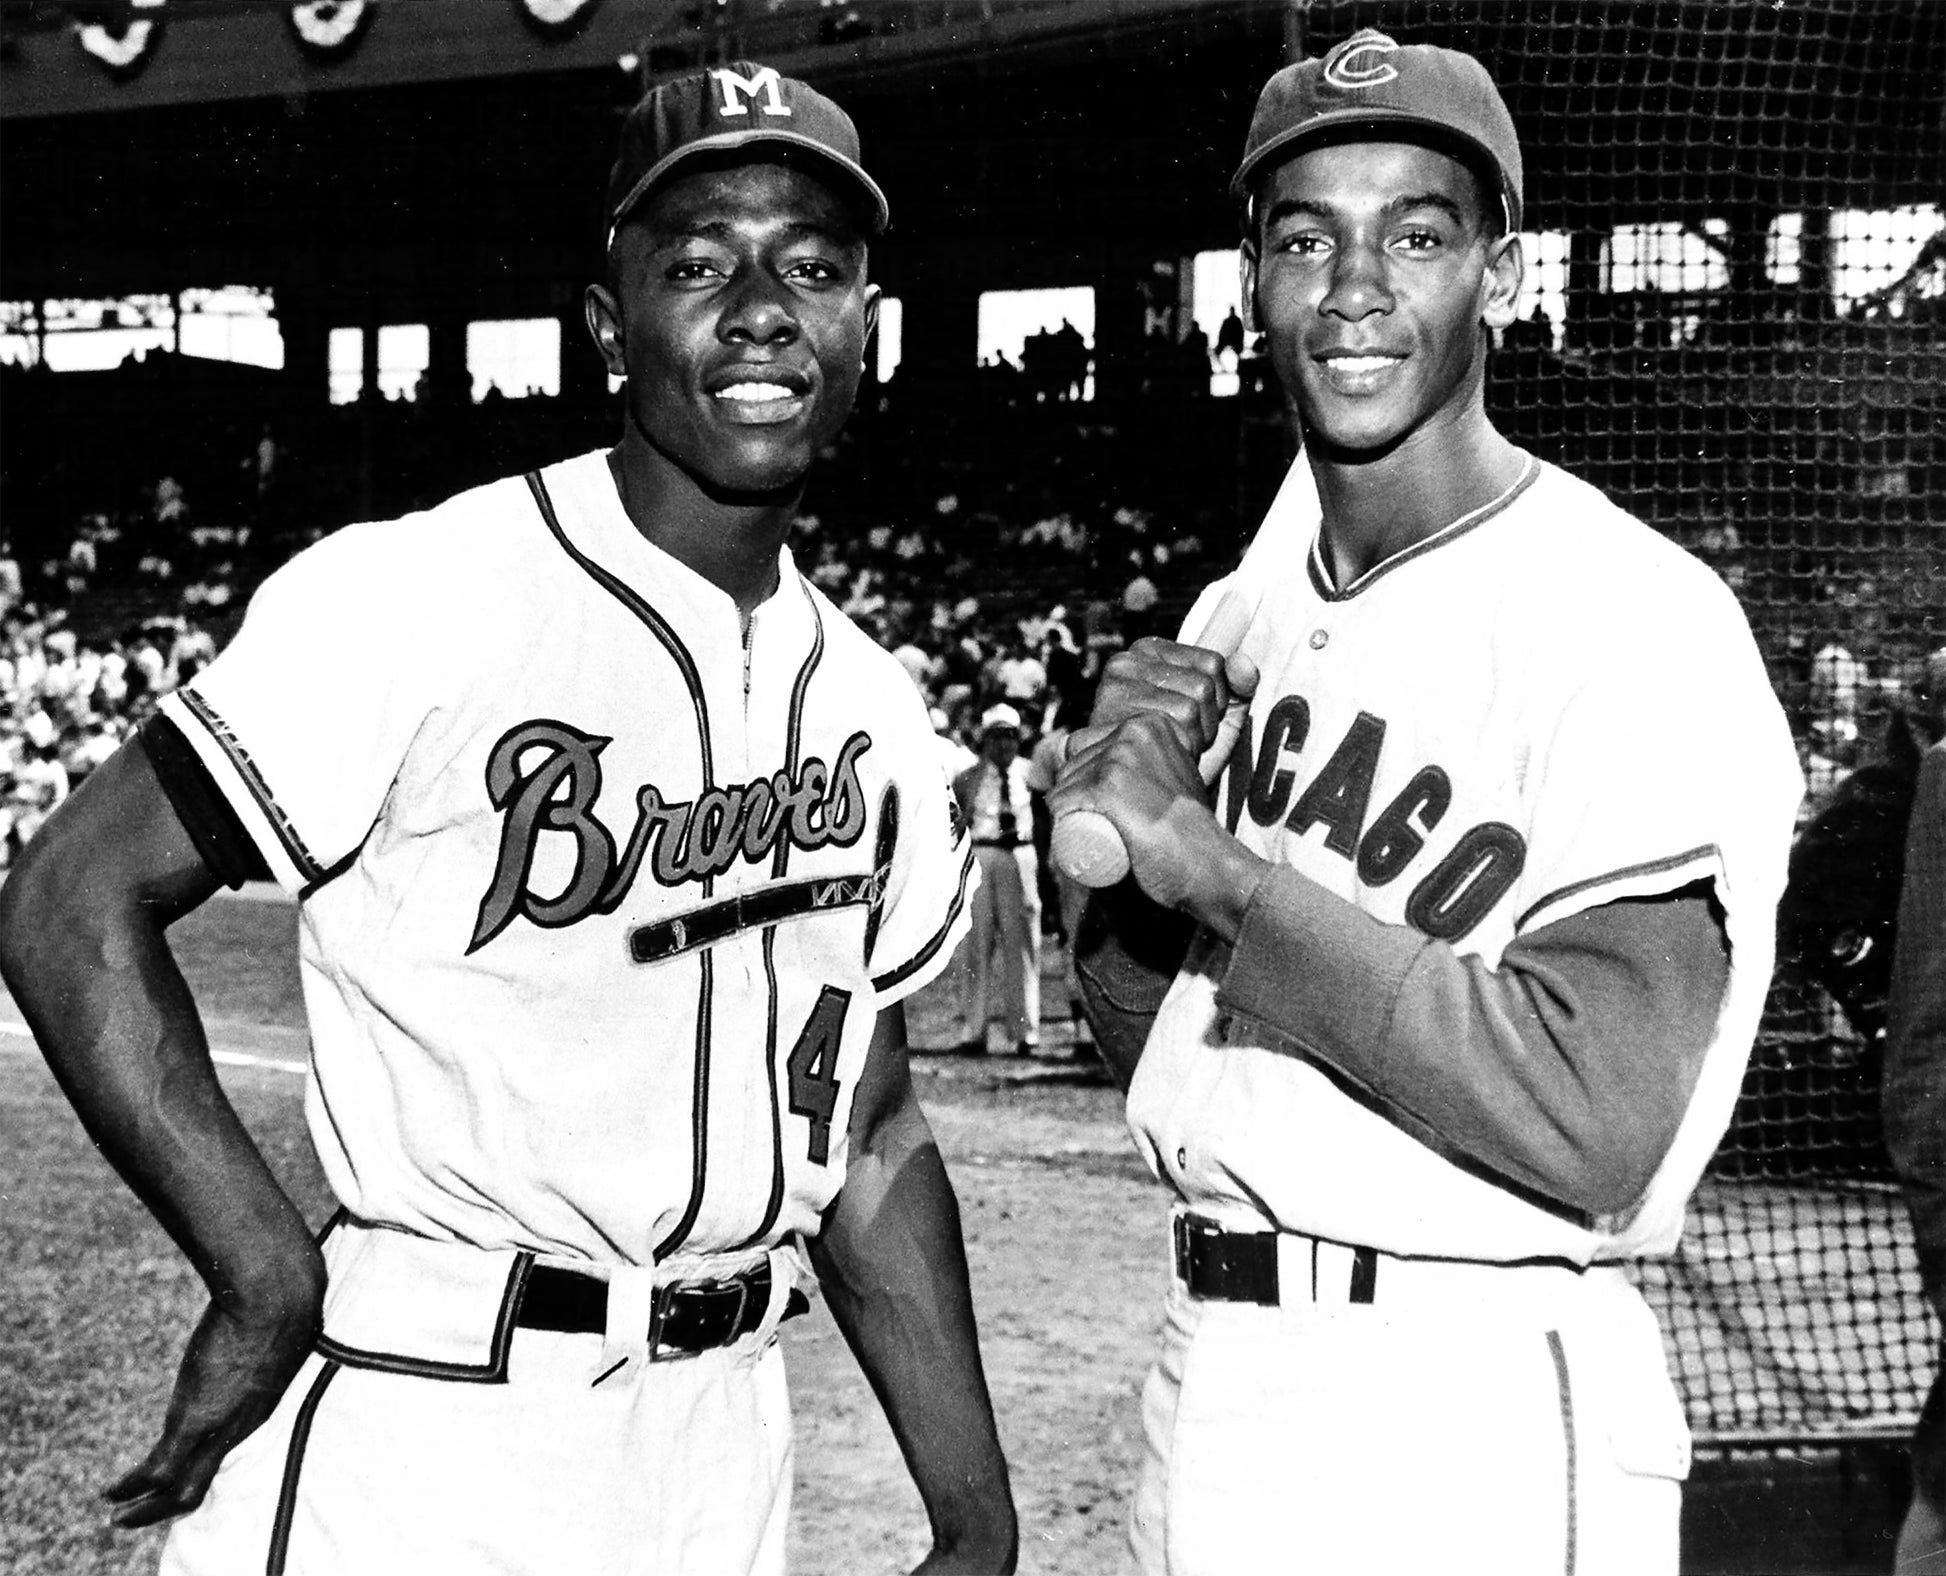 The Atlanta Braves Hank Aaron and Chicago Cubs Ernie Banks in 1961 8x10 Photograph